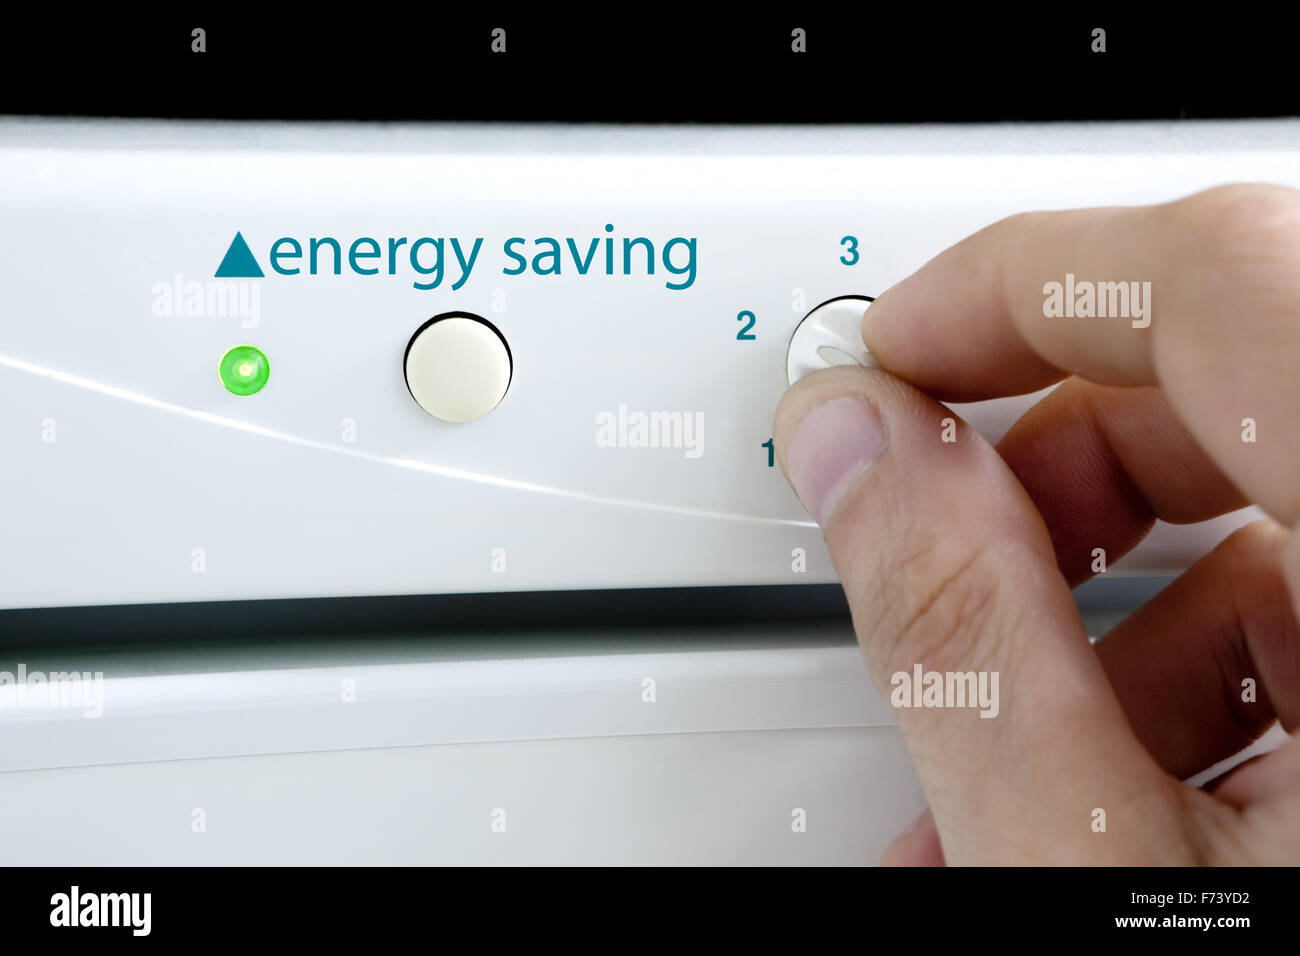 Concept of saving energy and appliance Stock Photo